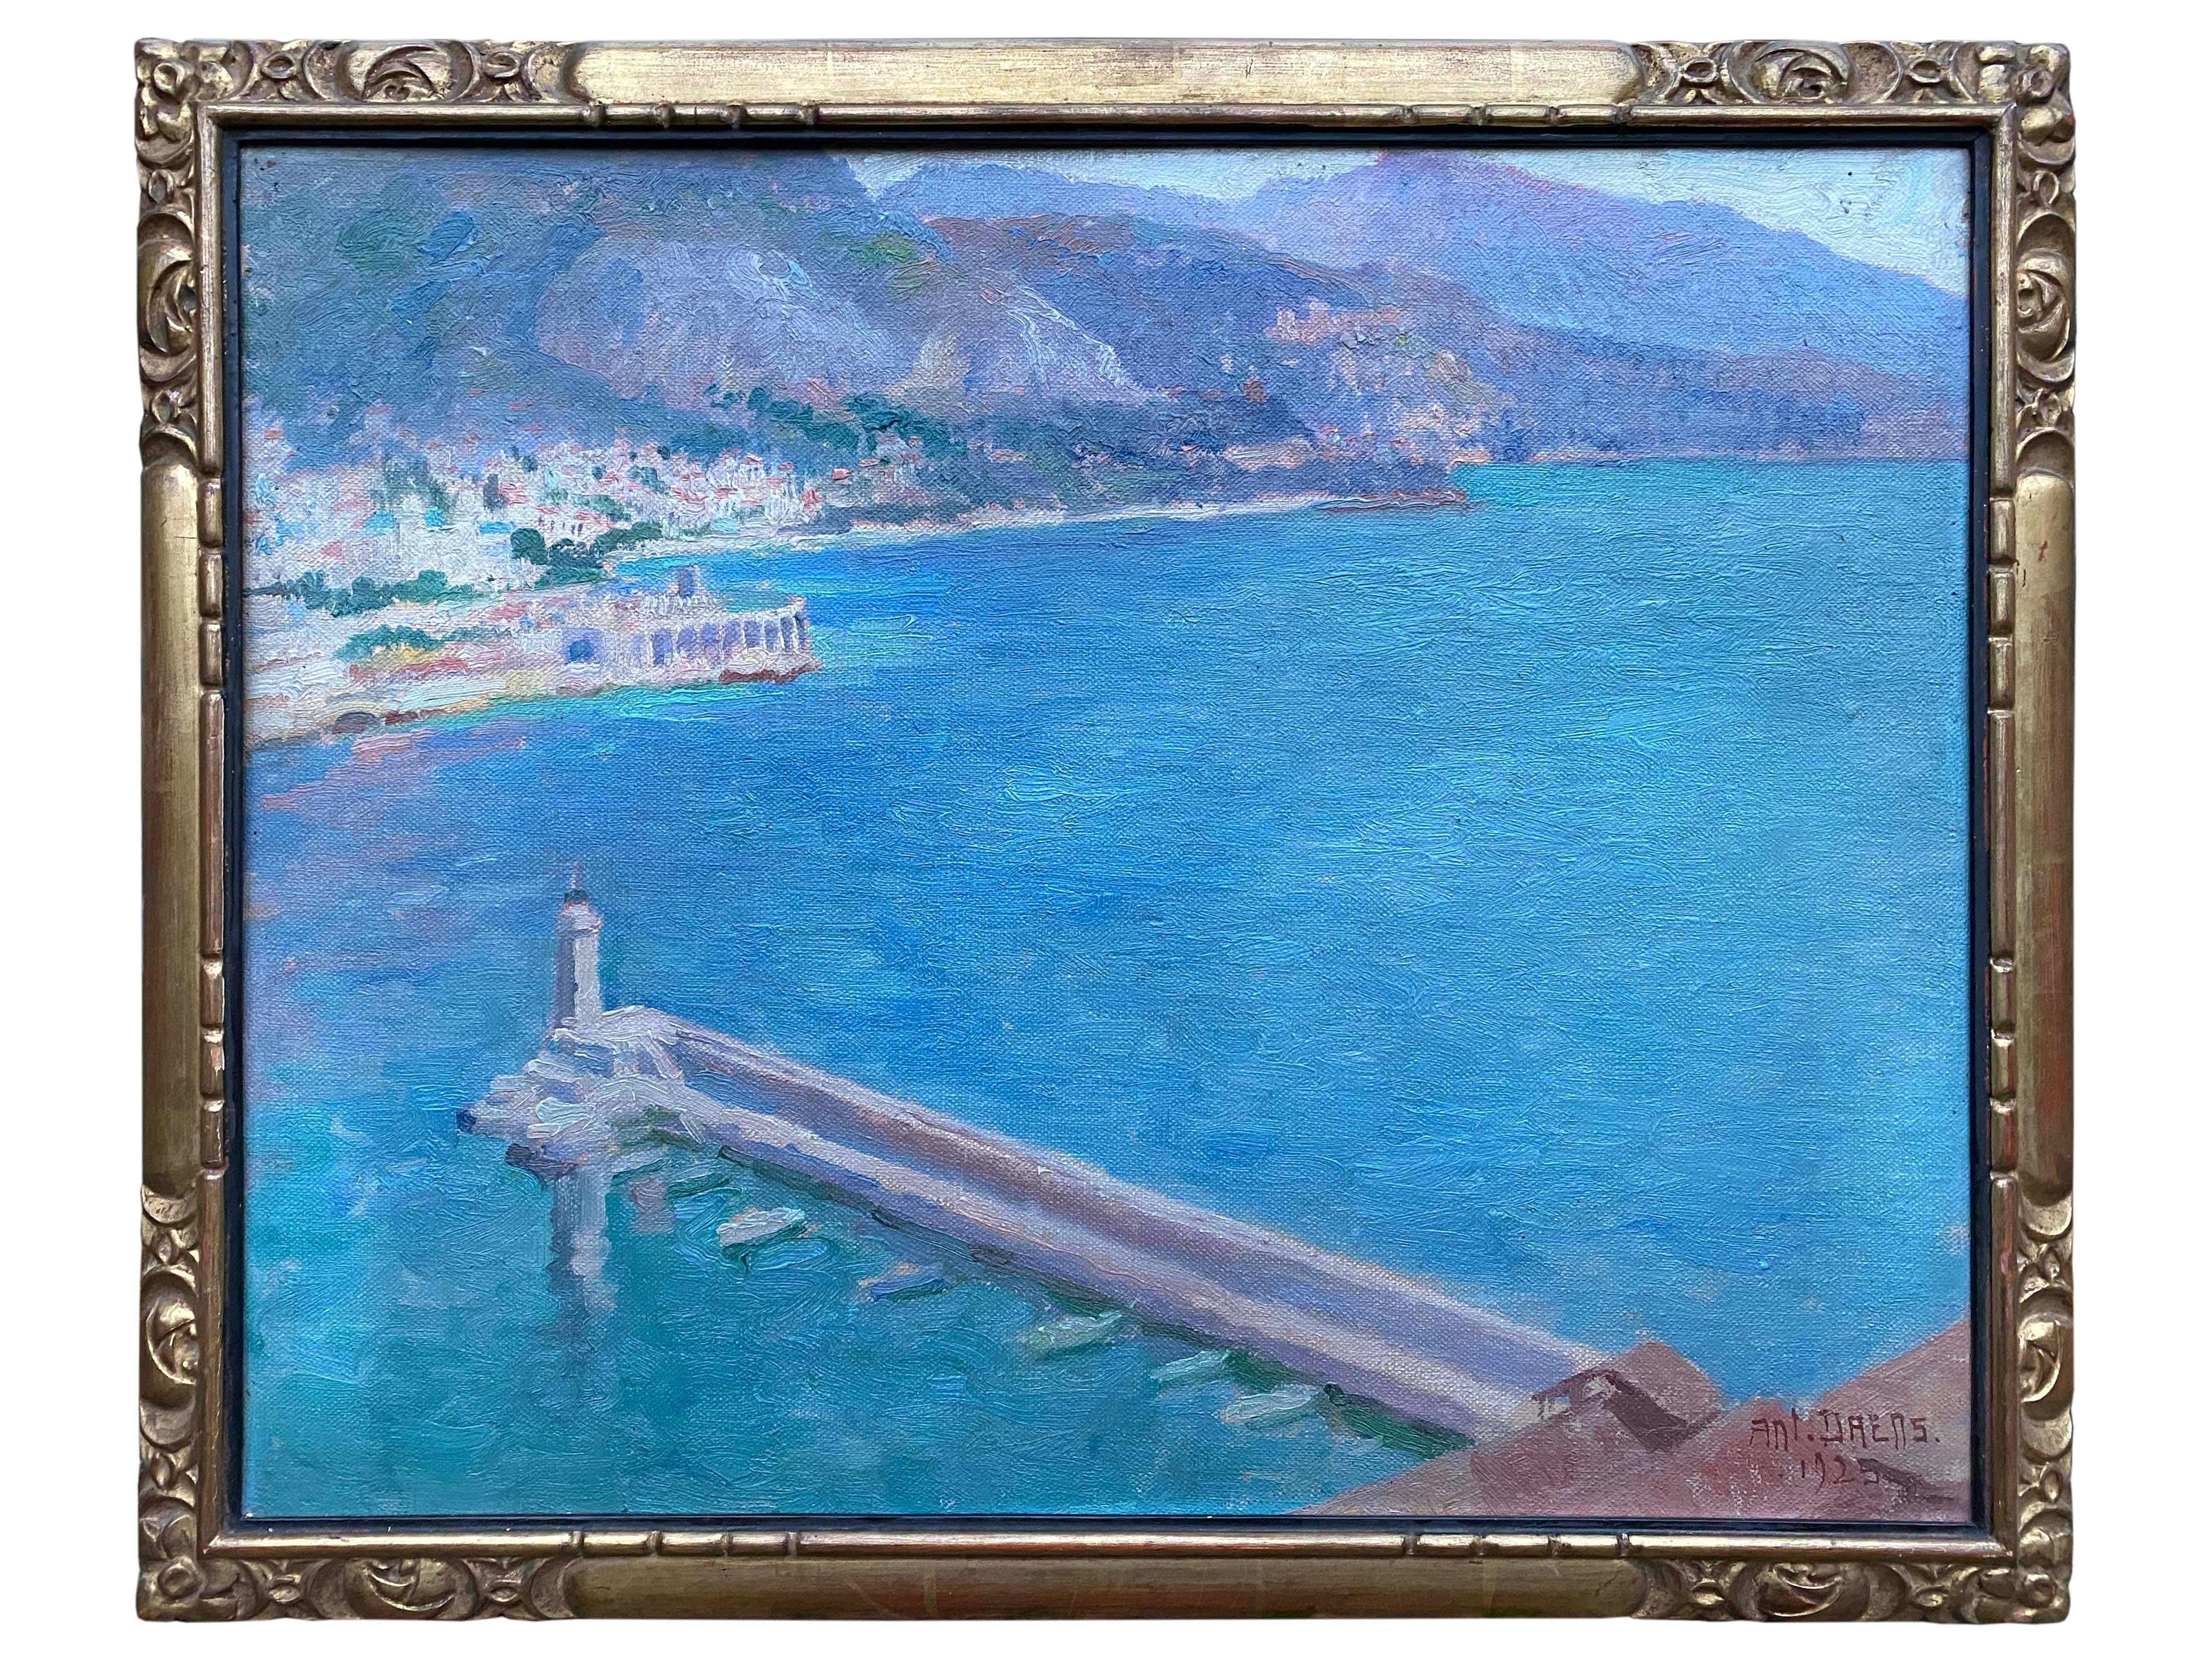 Seascape with Pier and Lighthouse of Monaco Harbour, Antoine Daens, 1871 - 1946